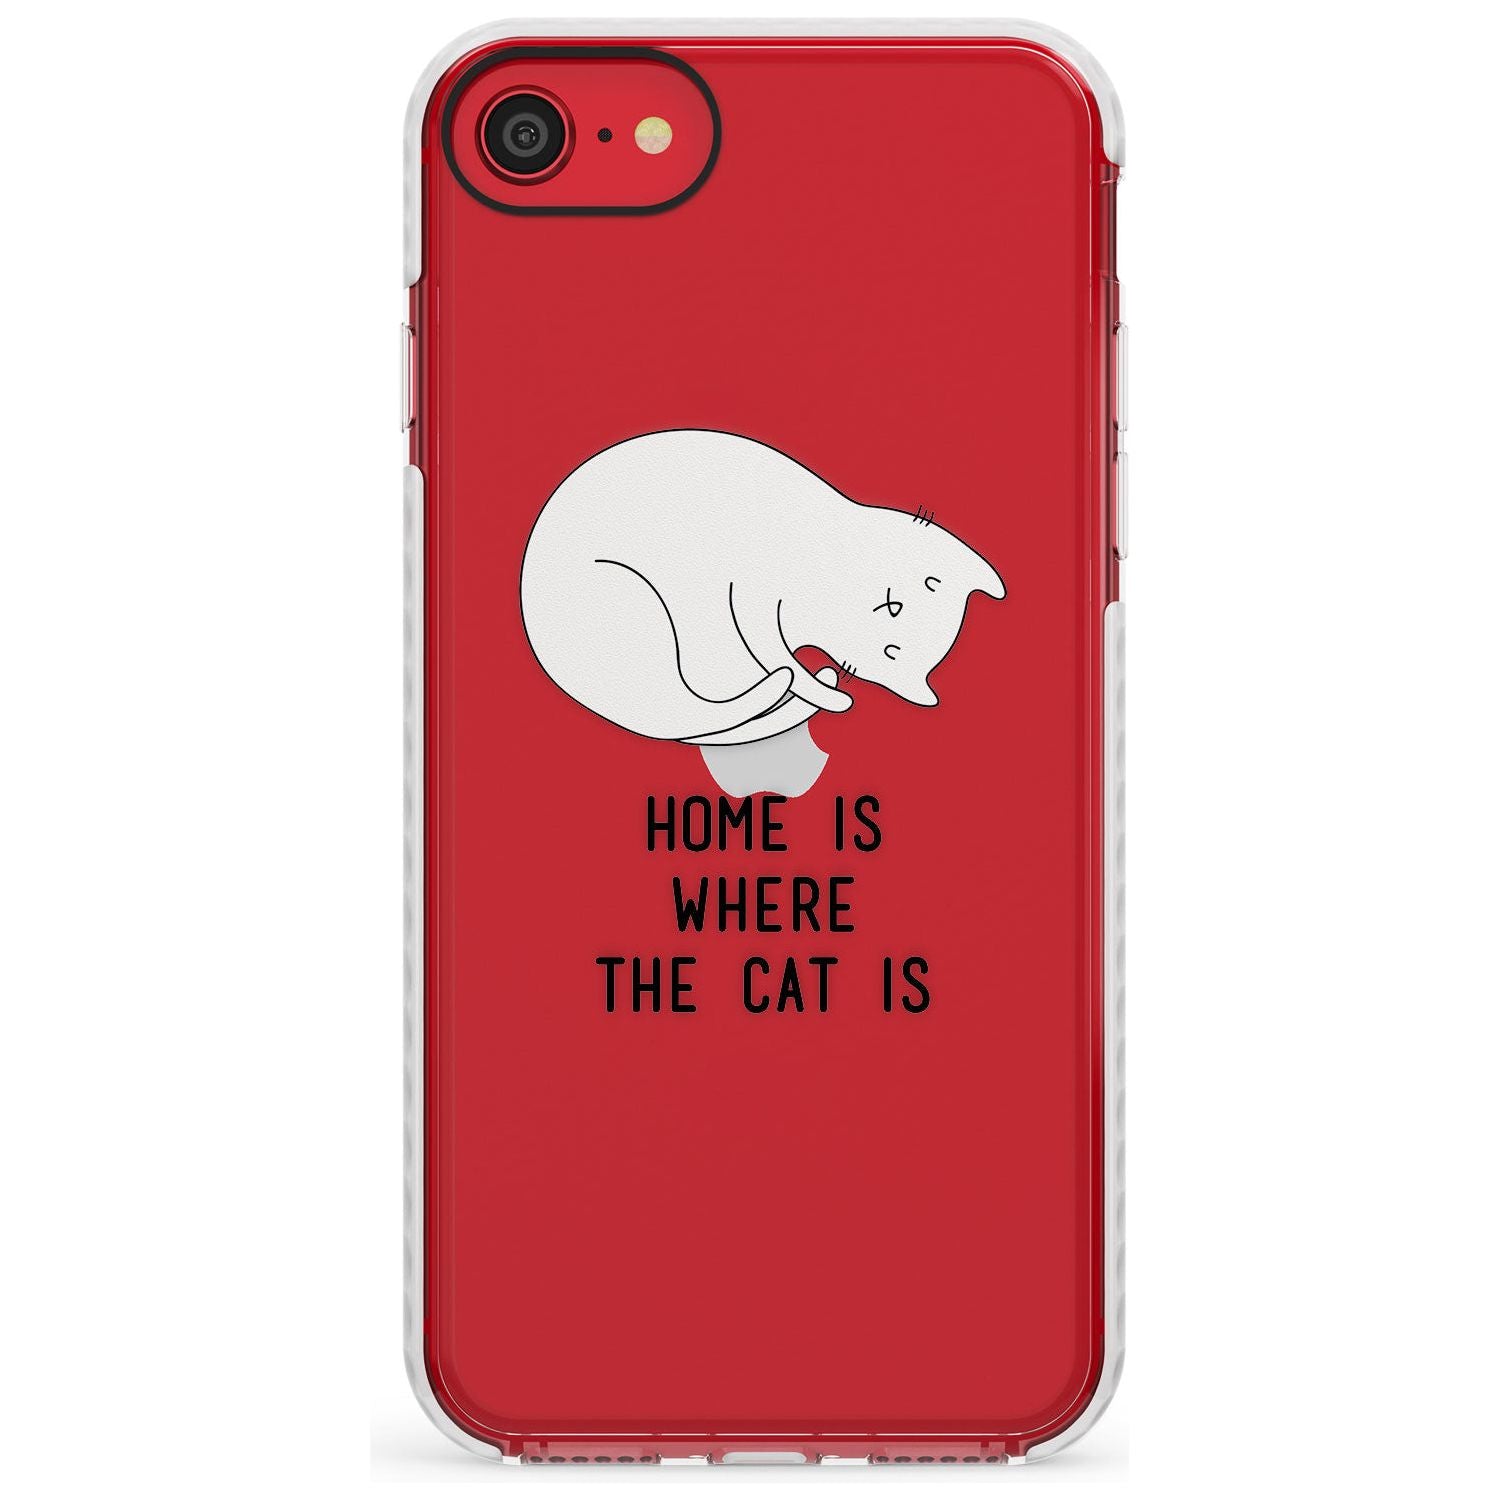 Home Is Where the Cat is Slim TPU Phone Case for iPhone SE 8 7 Plus